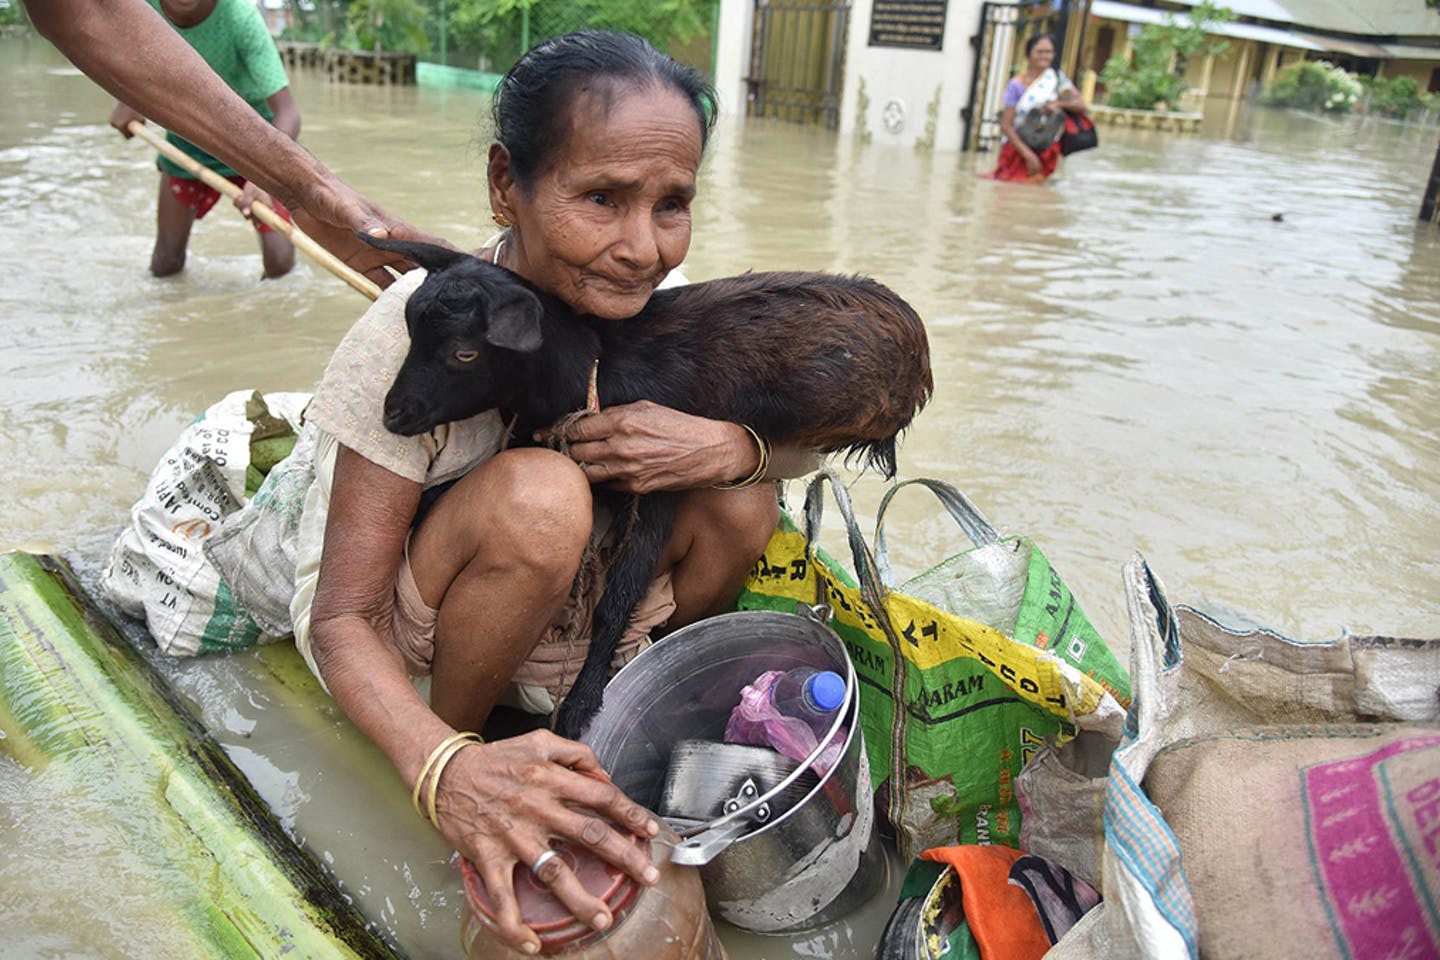 A flood affected resident of Jakhalabandha, Assam on the south bank of the Brahmaputra being evacuated on a raft on August 13, along with the family's livestock [Image by Biju Boro]